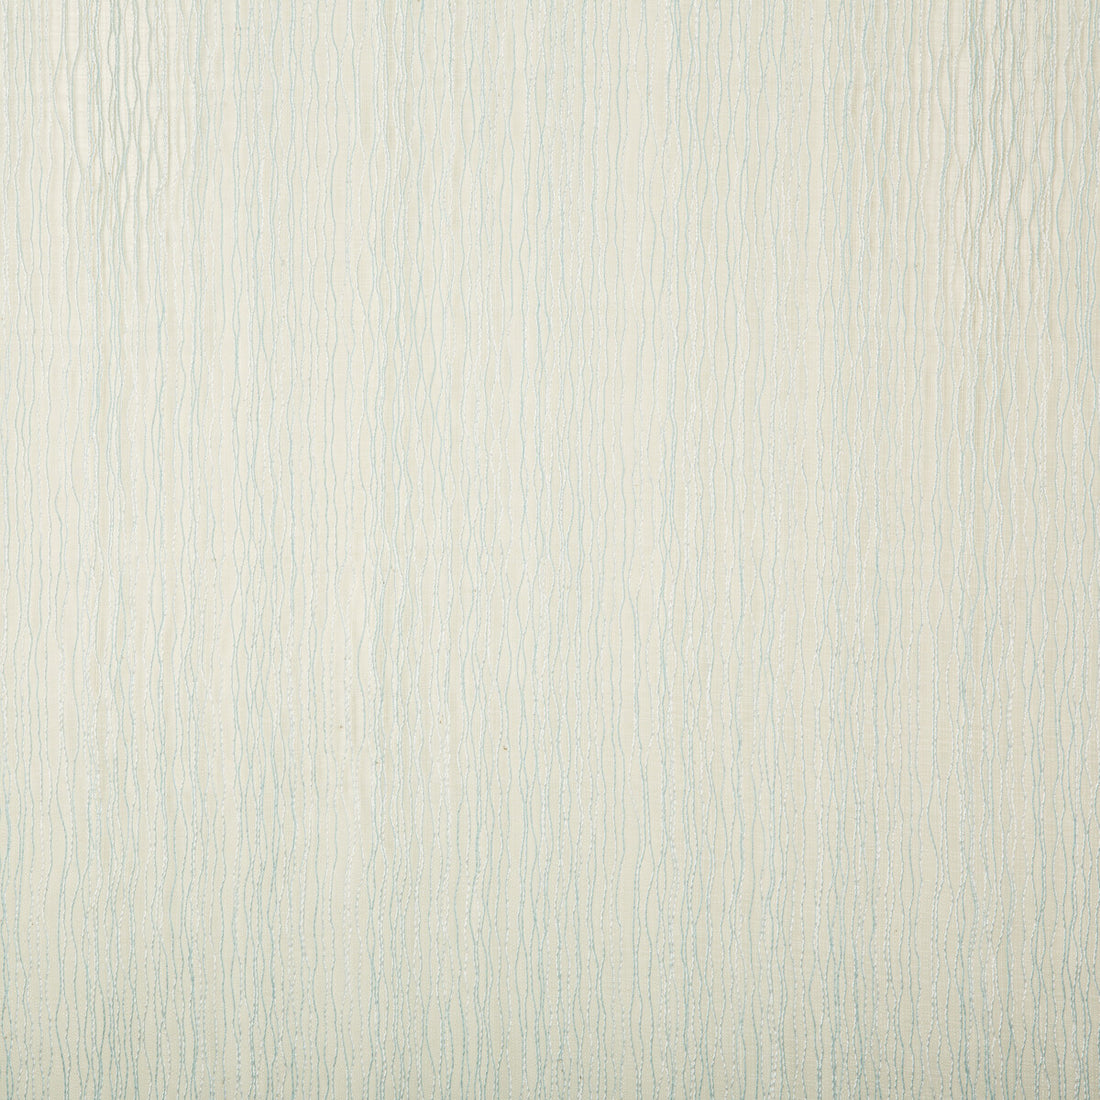 Adore fabric in seaglass color - pattern 4775.13.0 - by Kravet Contract in the Kravet Cruise collection